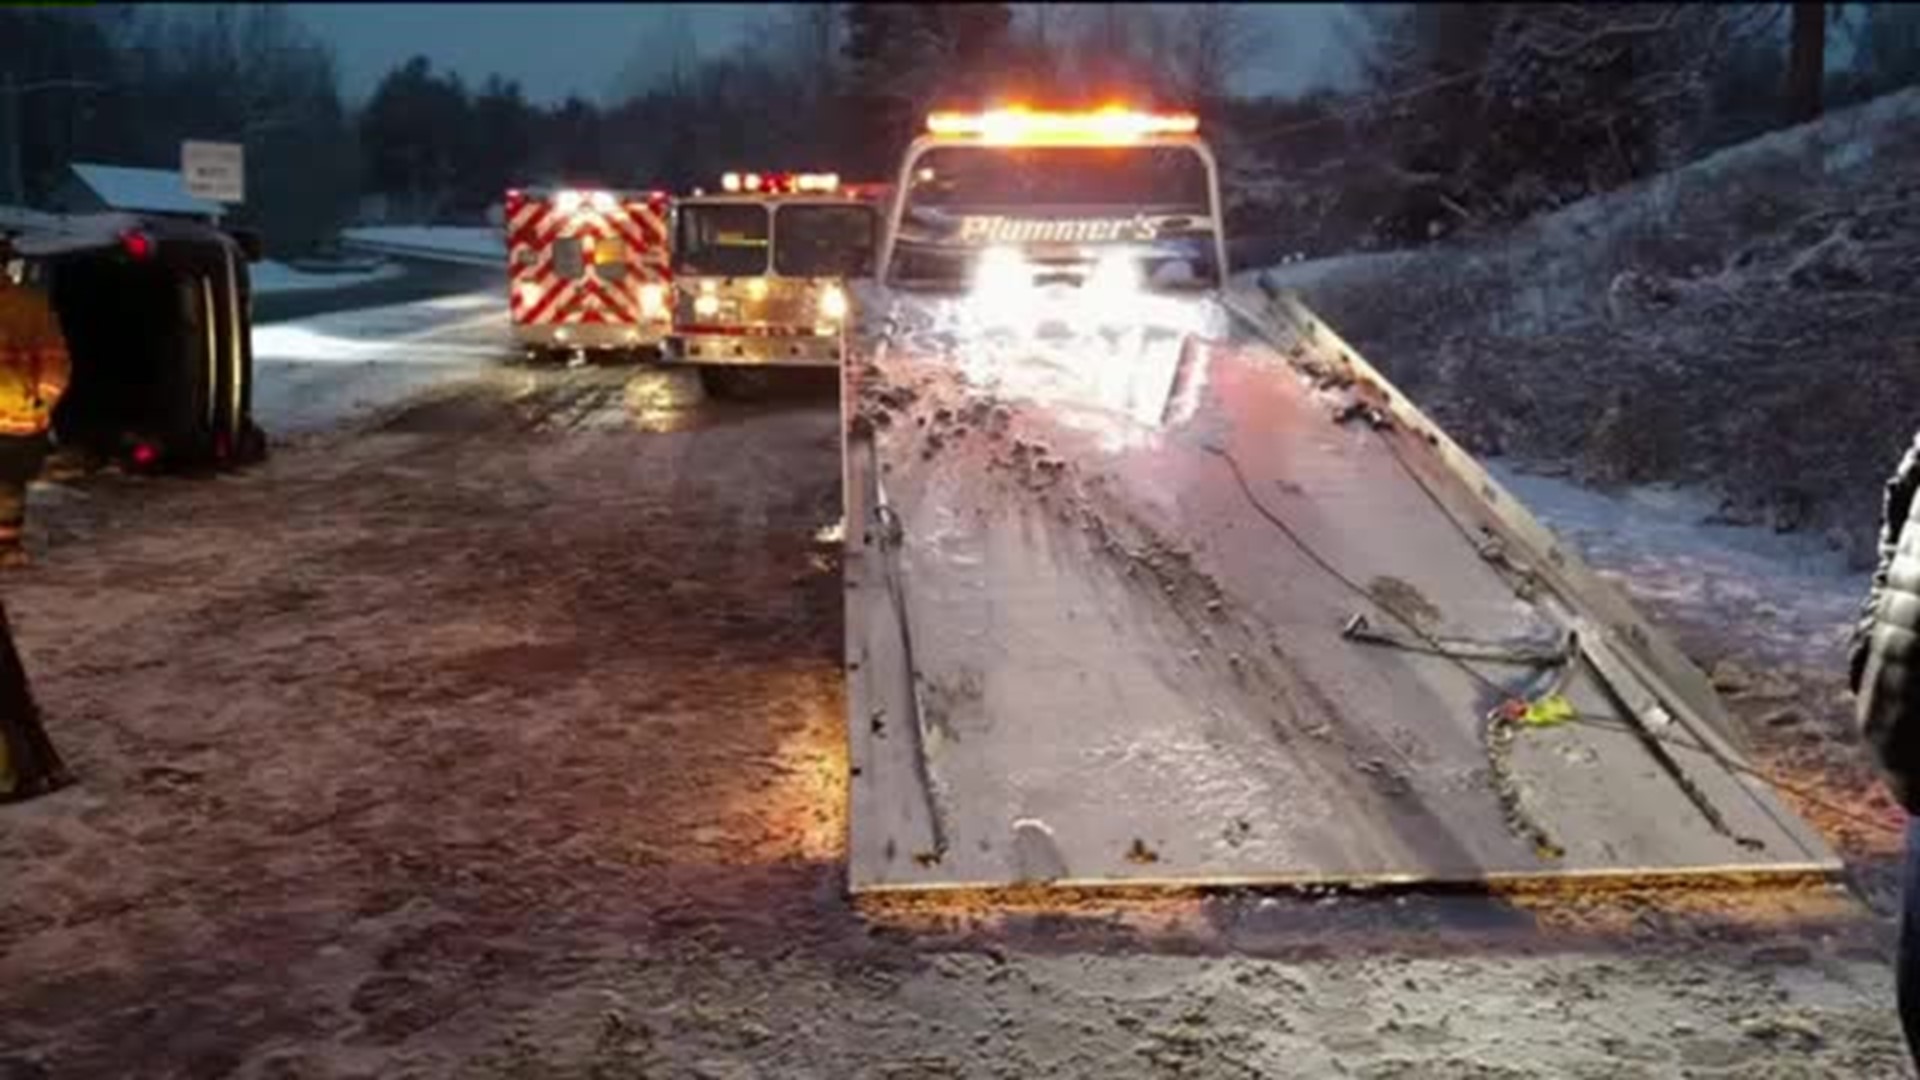 Driver Crashes after Hitting Tow Truck Ramp